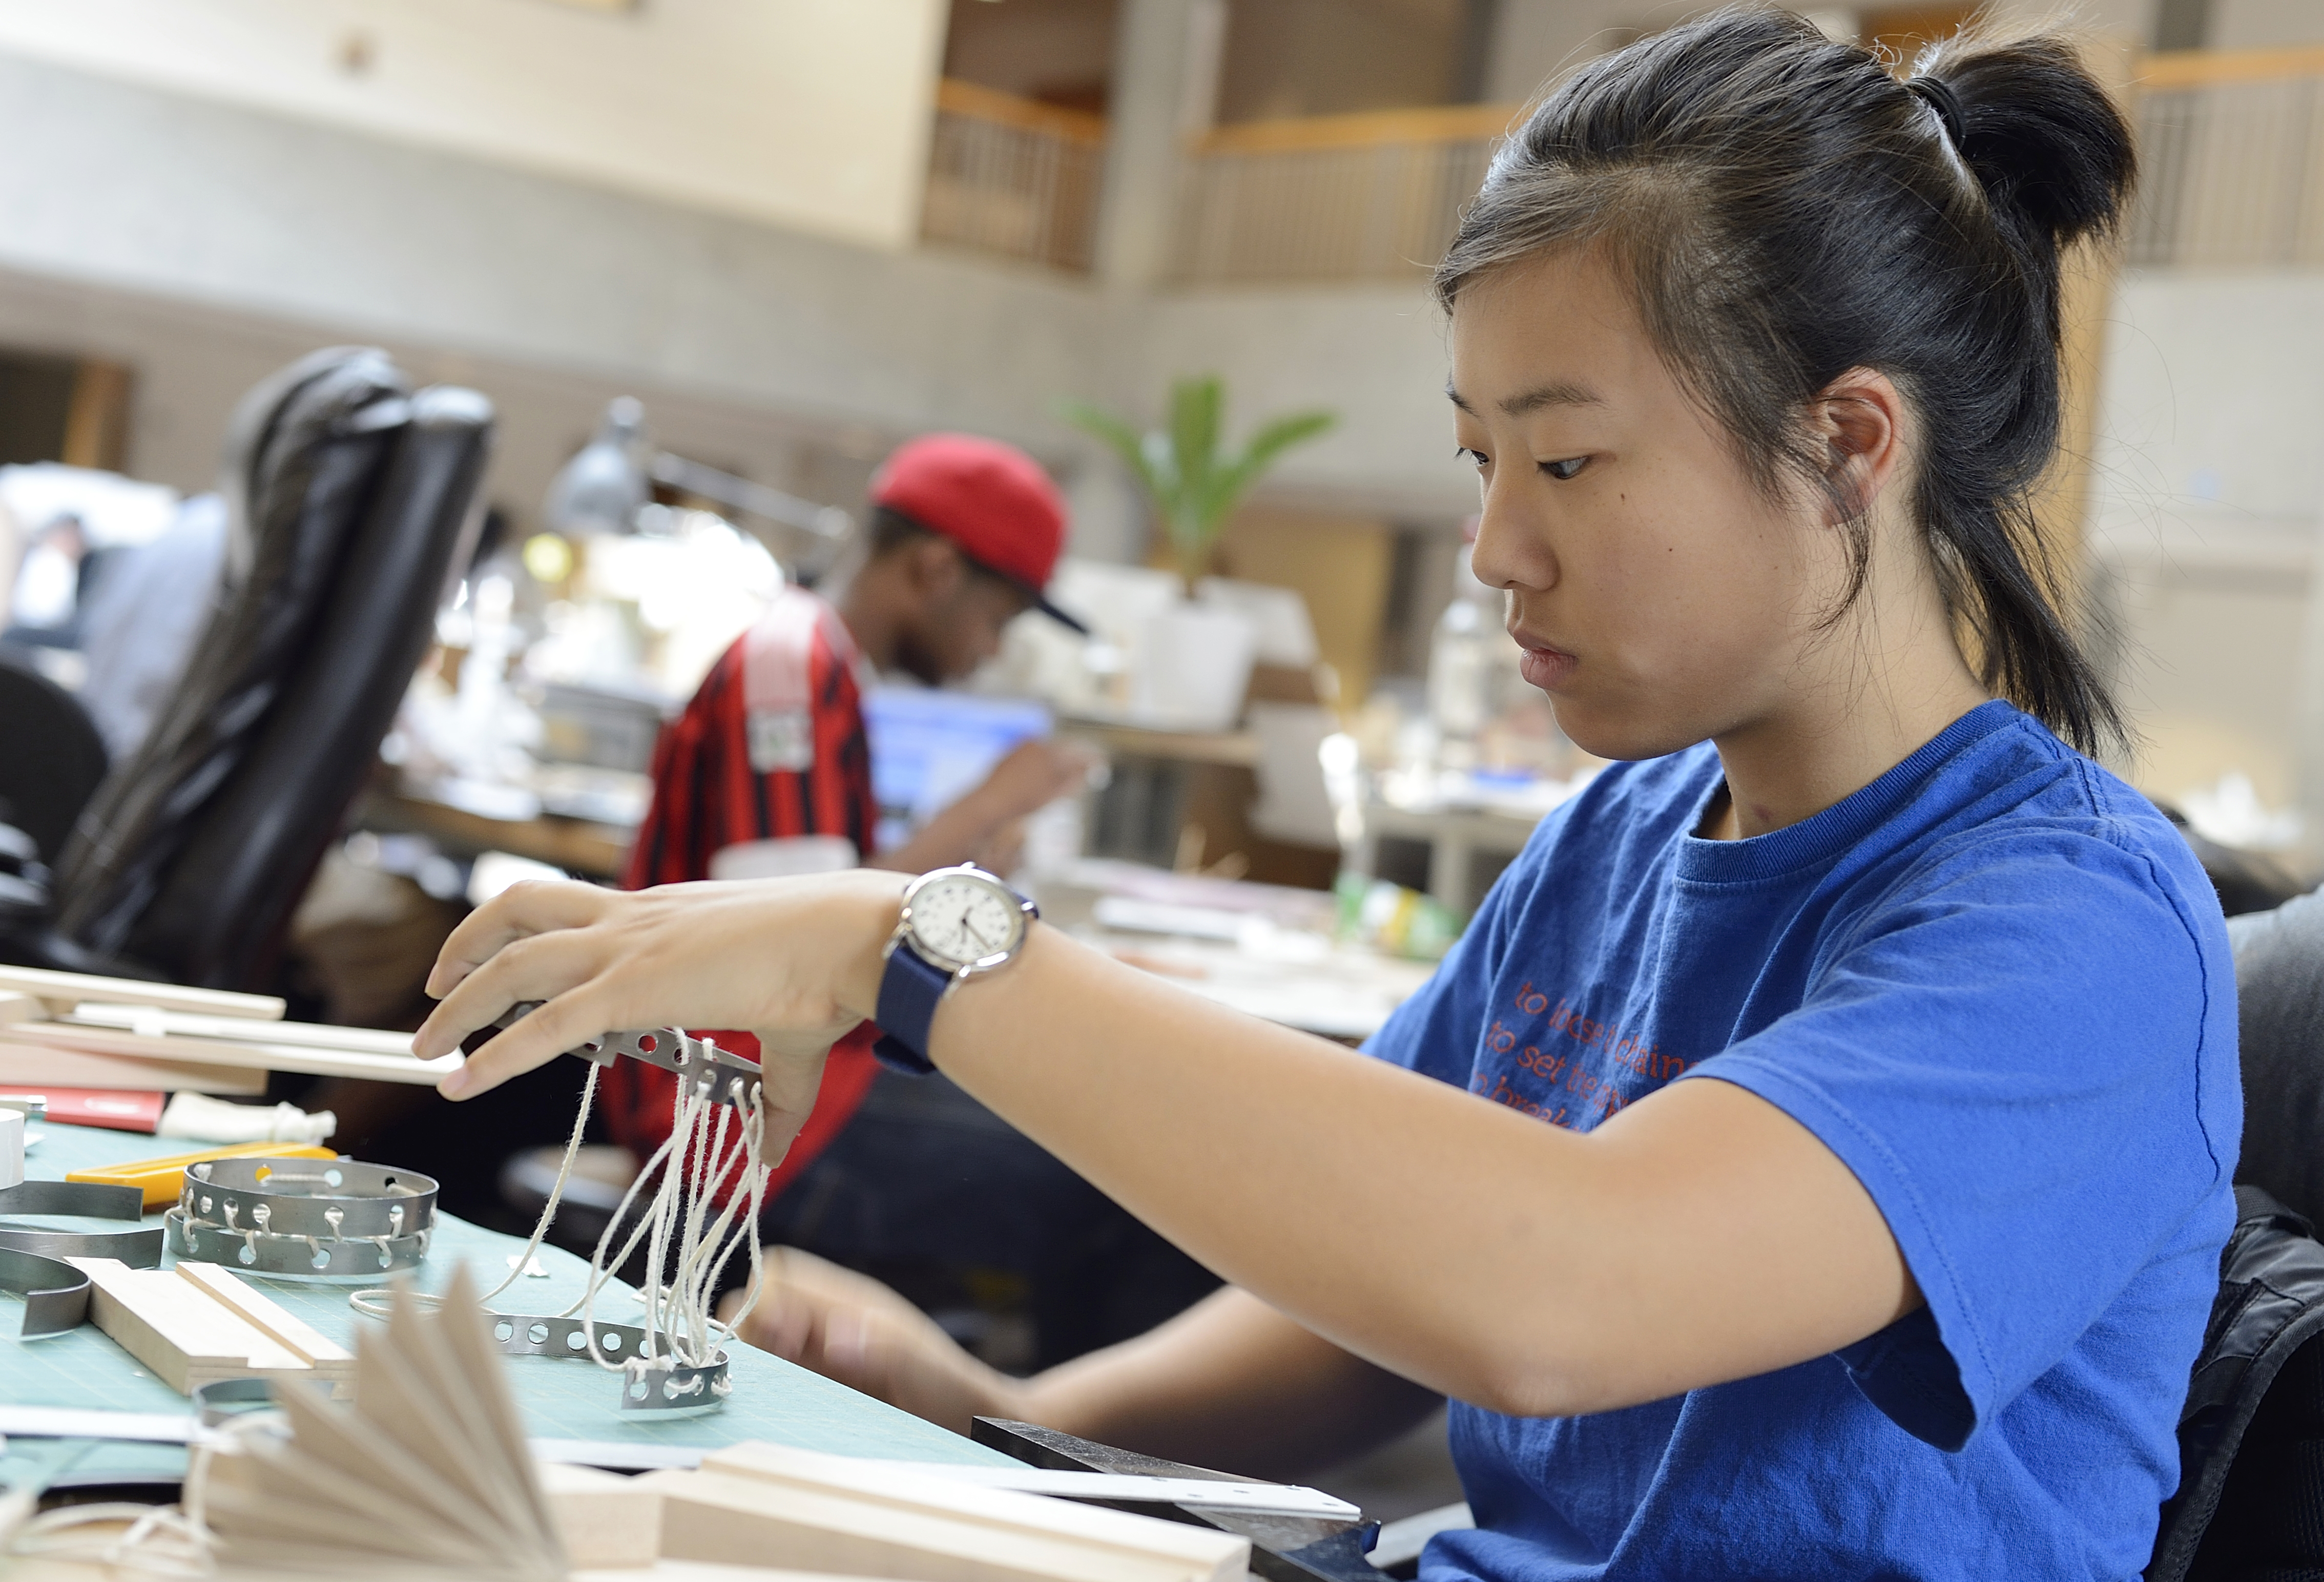 A girl in the foreground works on a design project made of metal and string. 